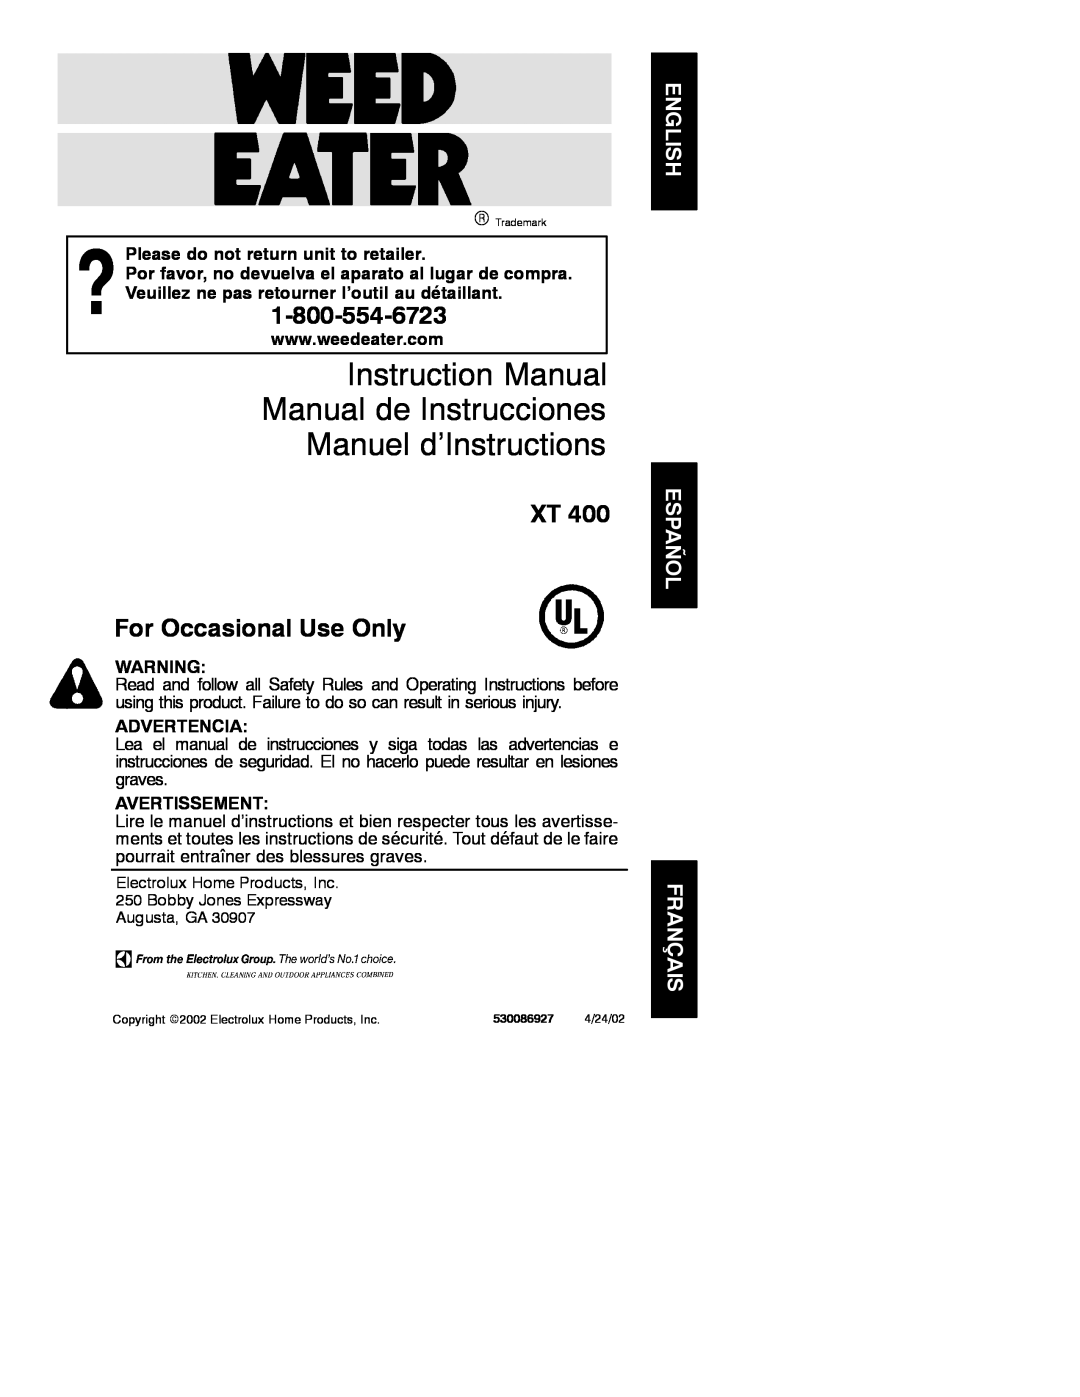 Weed Eater 530086927 instruction manual Please do not return unit to retailer, Advertencia, Avertissement 